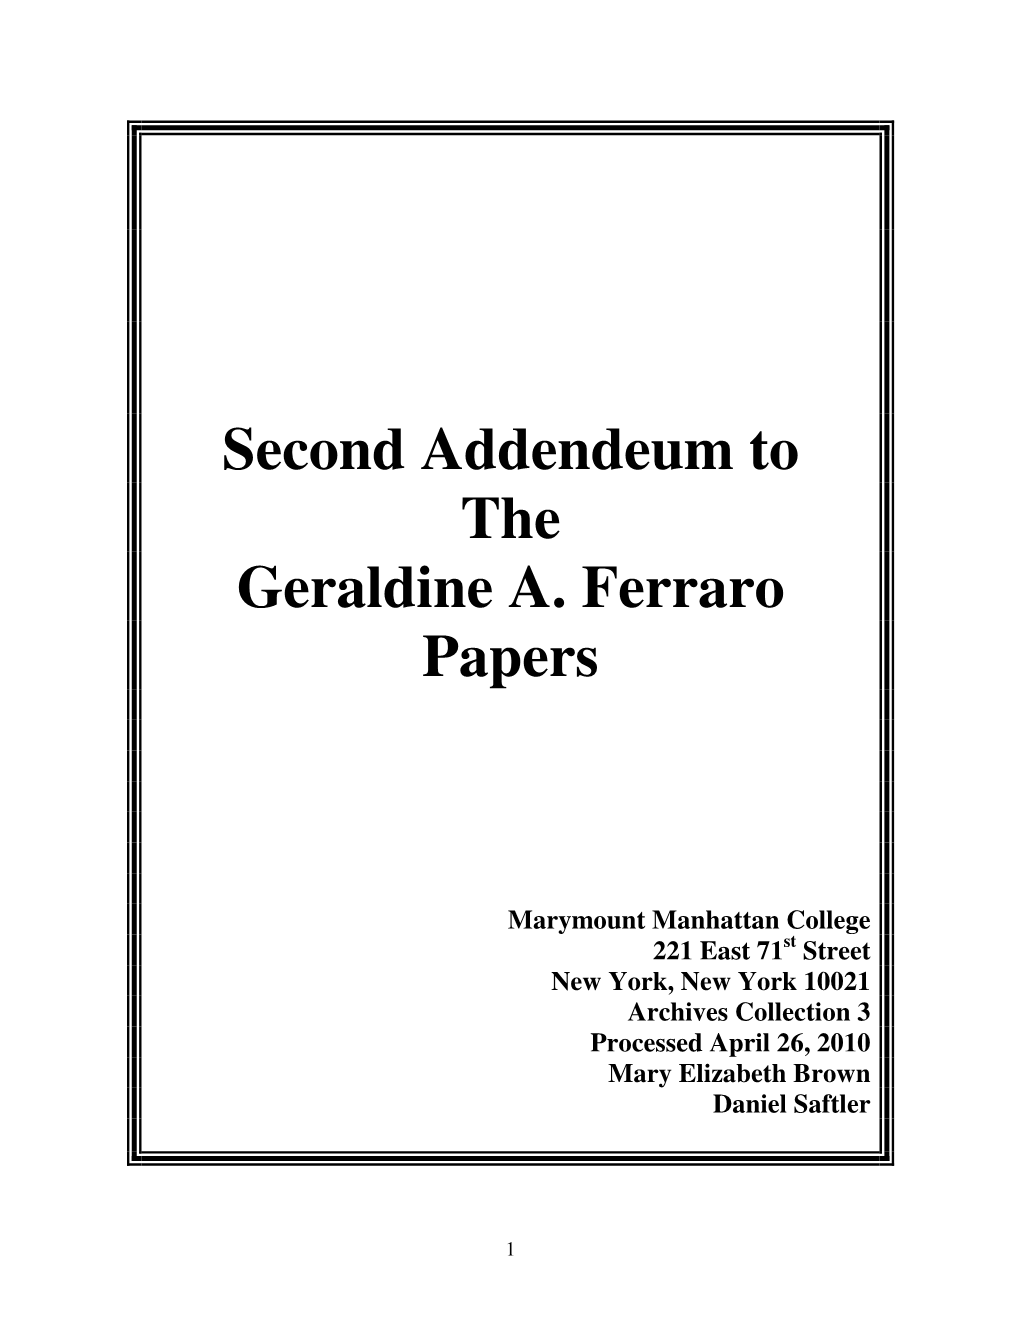 Second Addendeum to the Geraldine A. Ferraro Papers